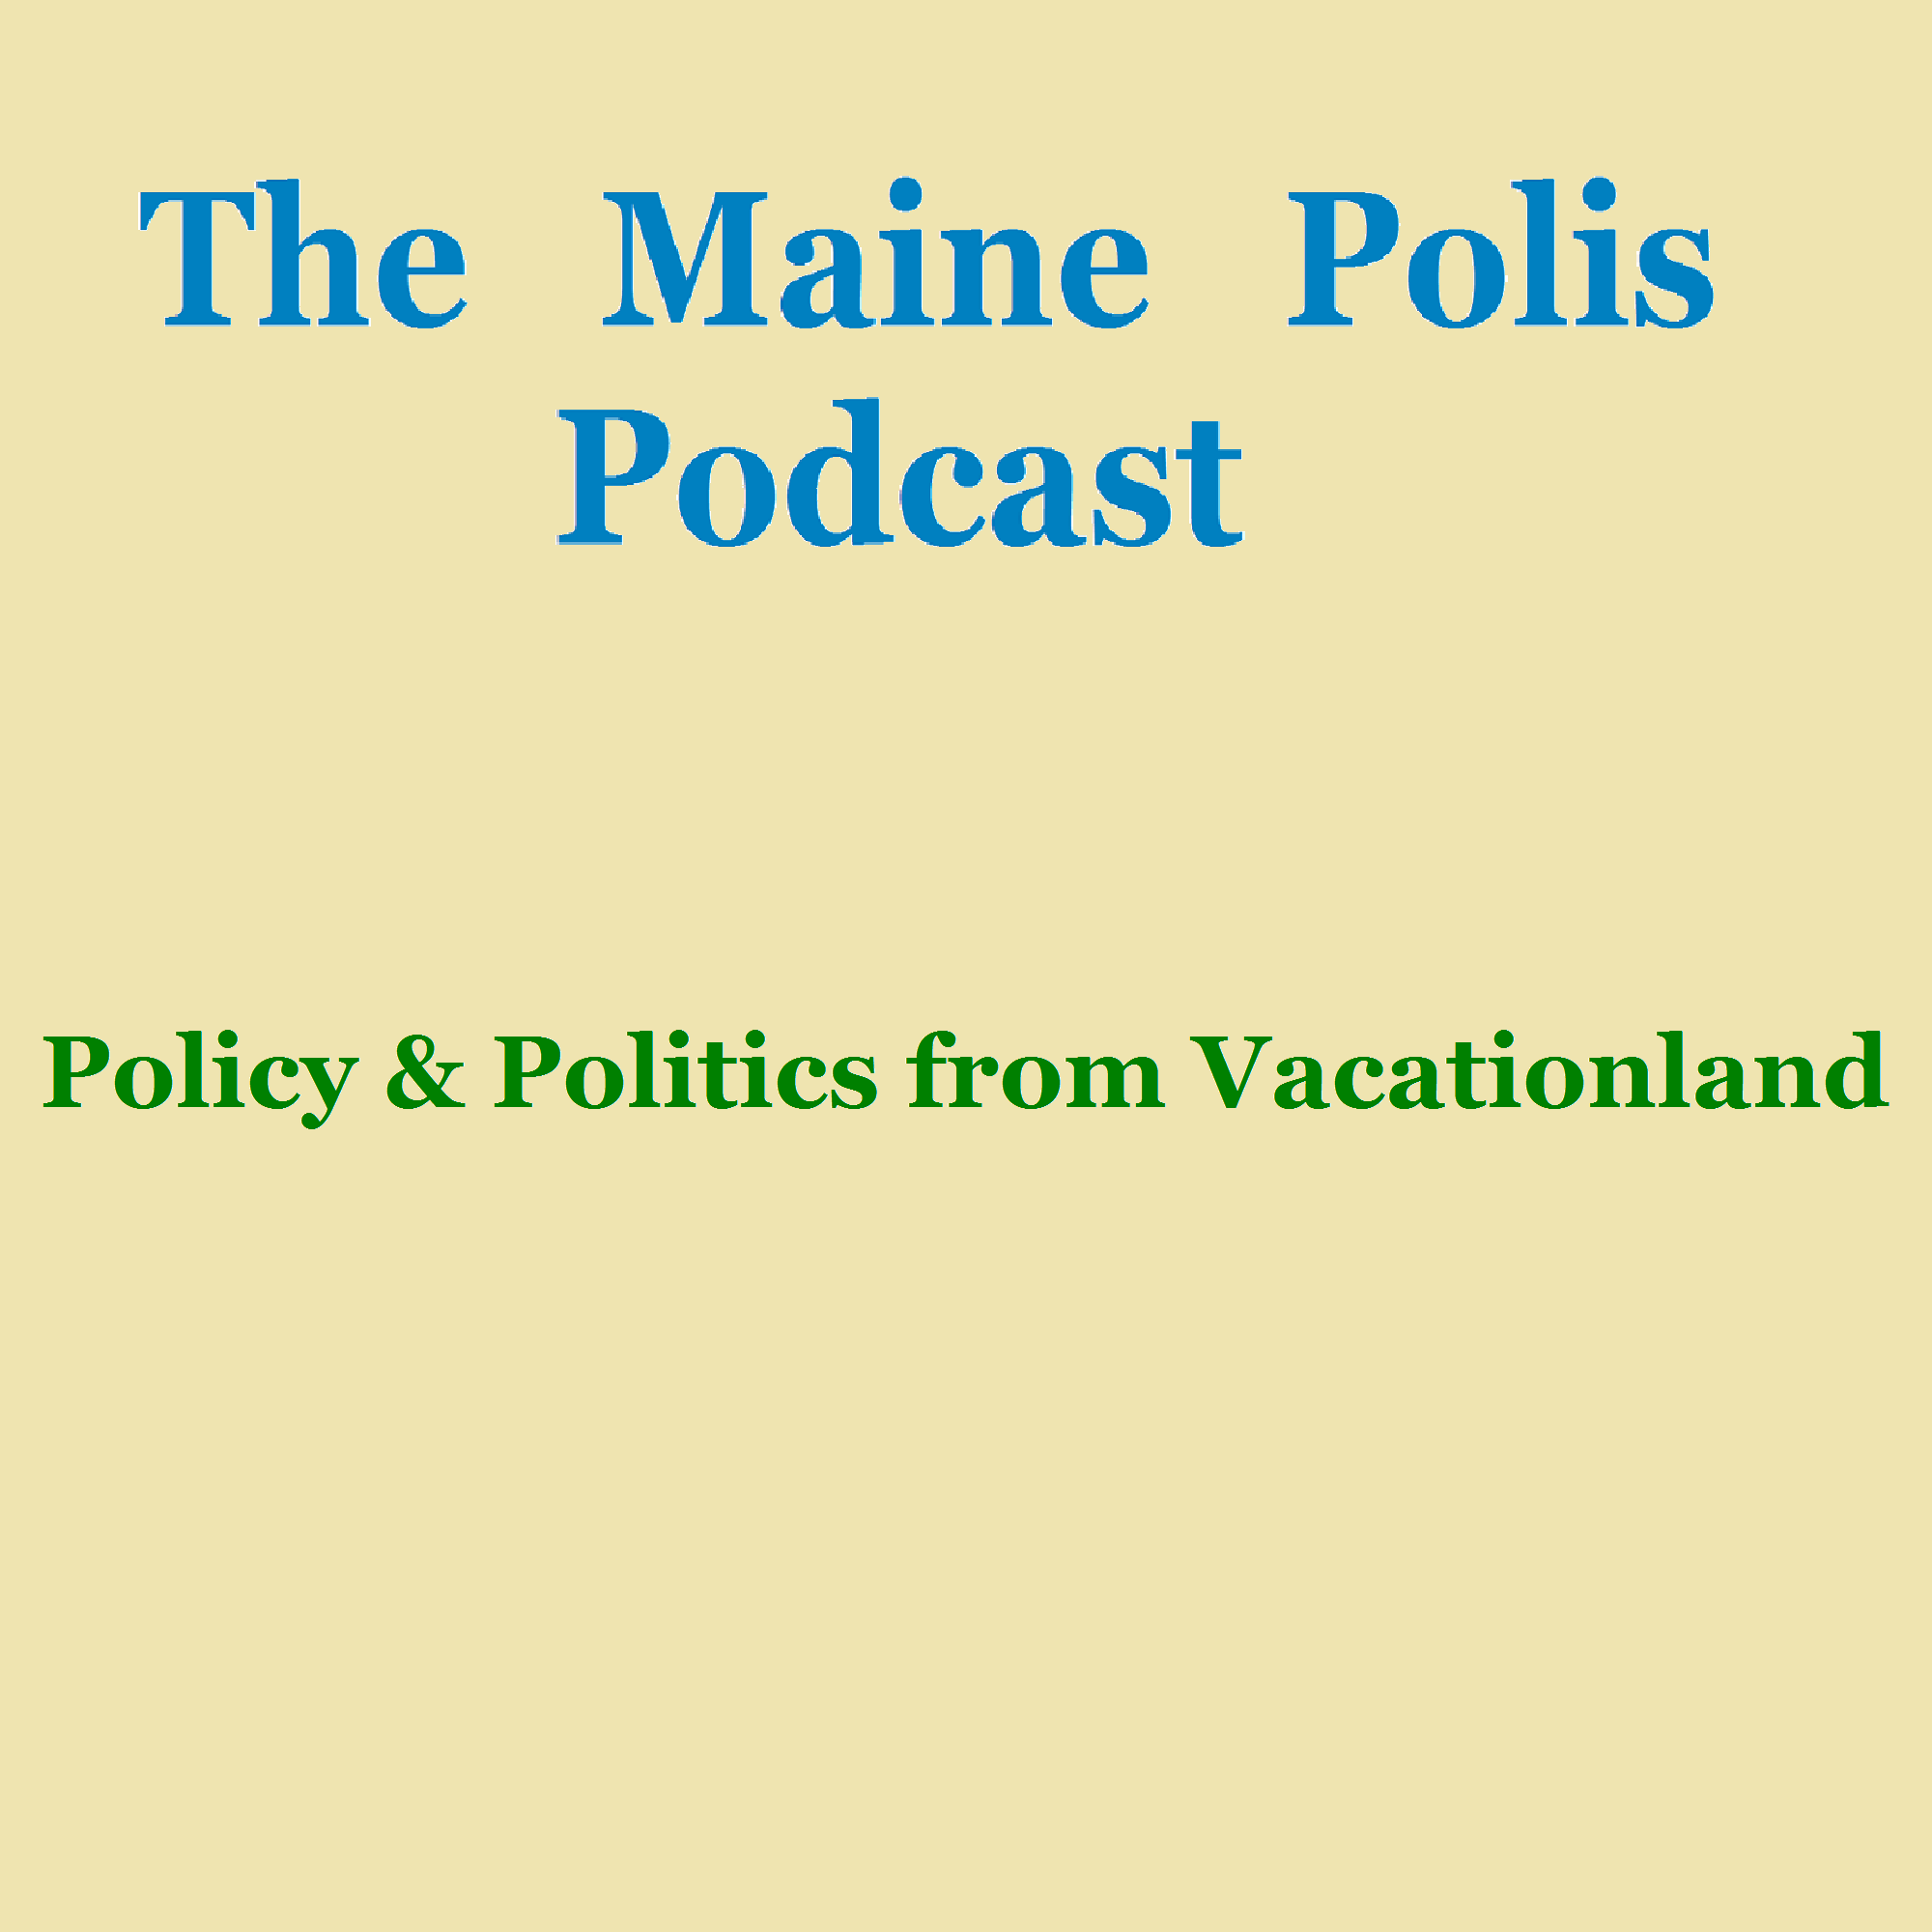 TMP Podcast #6 - New England Clean Energy Connect Project Part II:  The Companies Pushing for the Project